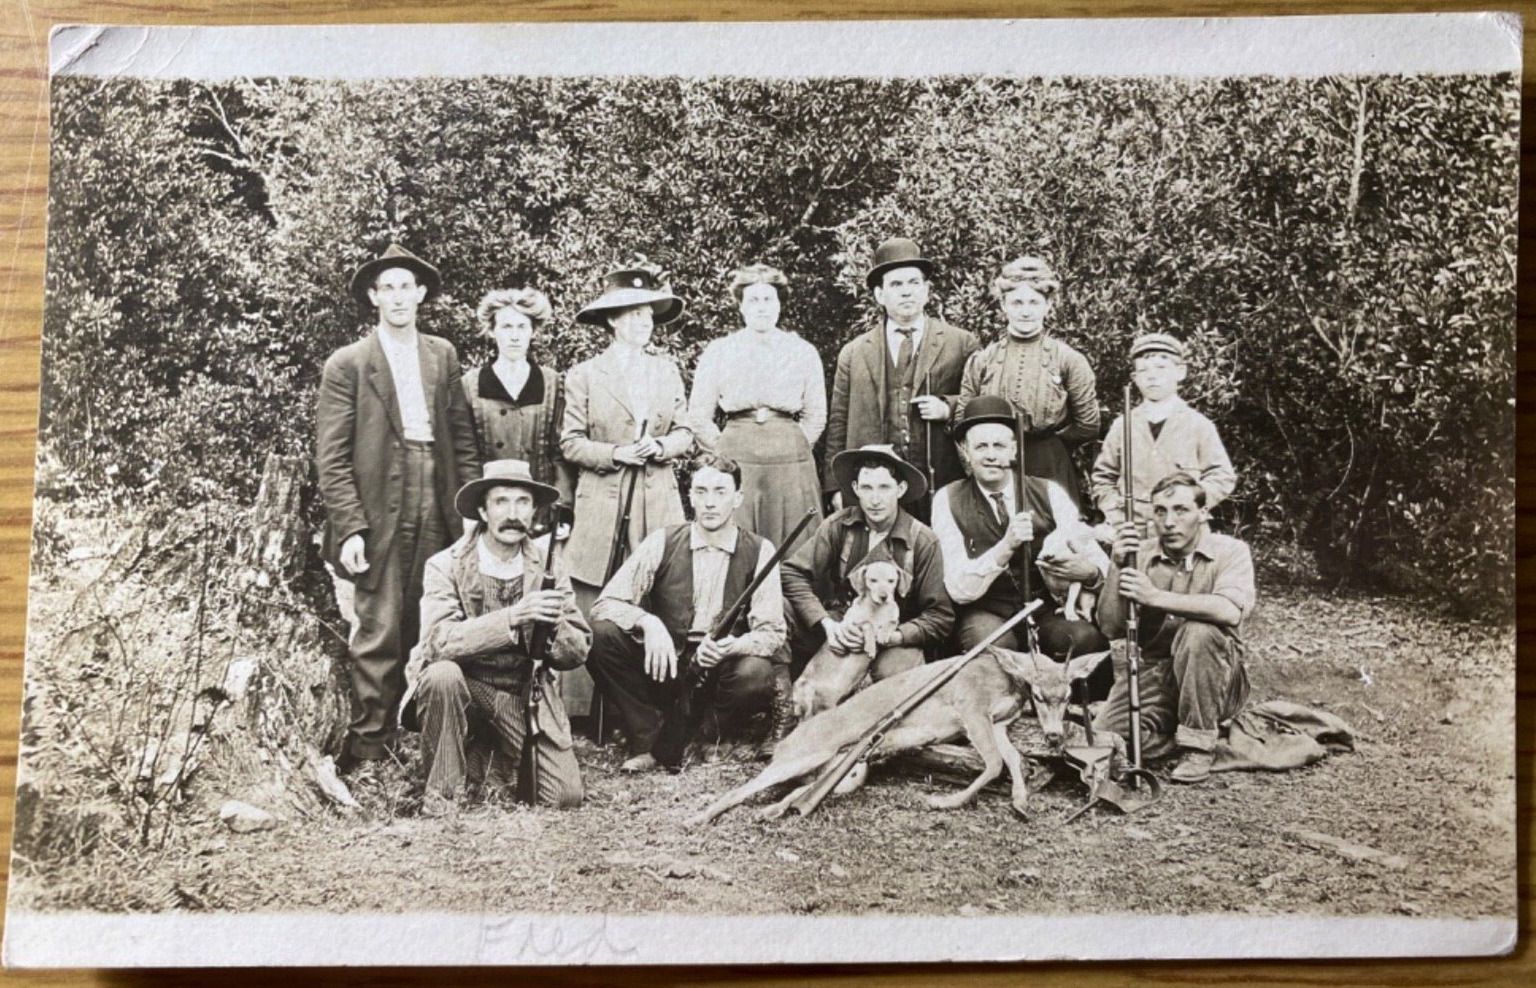 1912 RPPC - ROSEBURG, OREGON HUNTING PARTY old real photo postcard FRED BRANDT